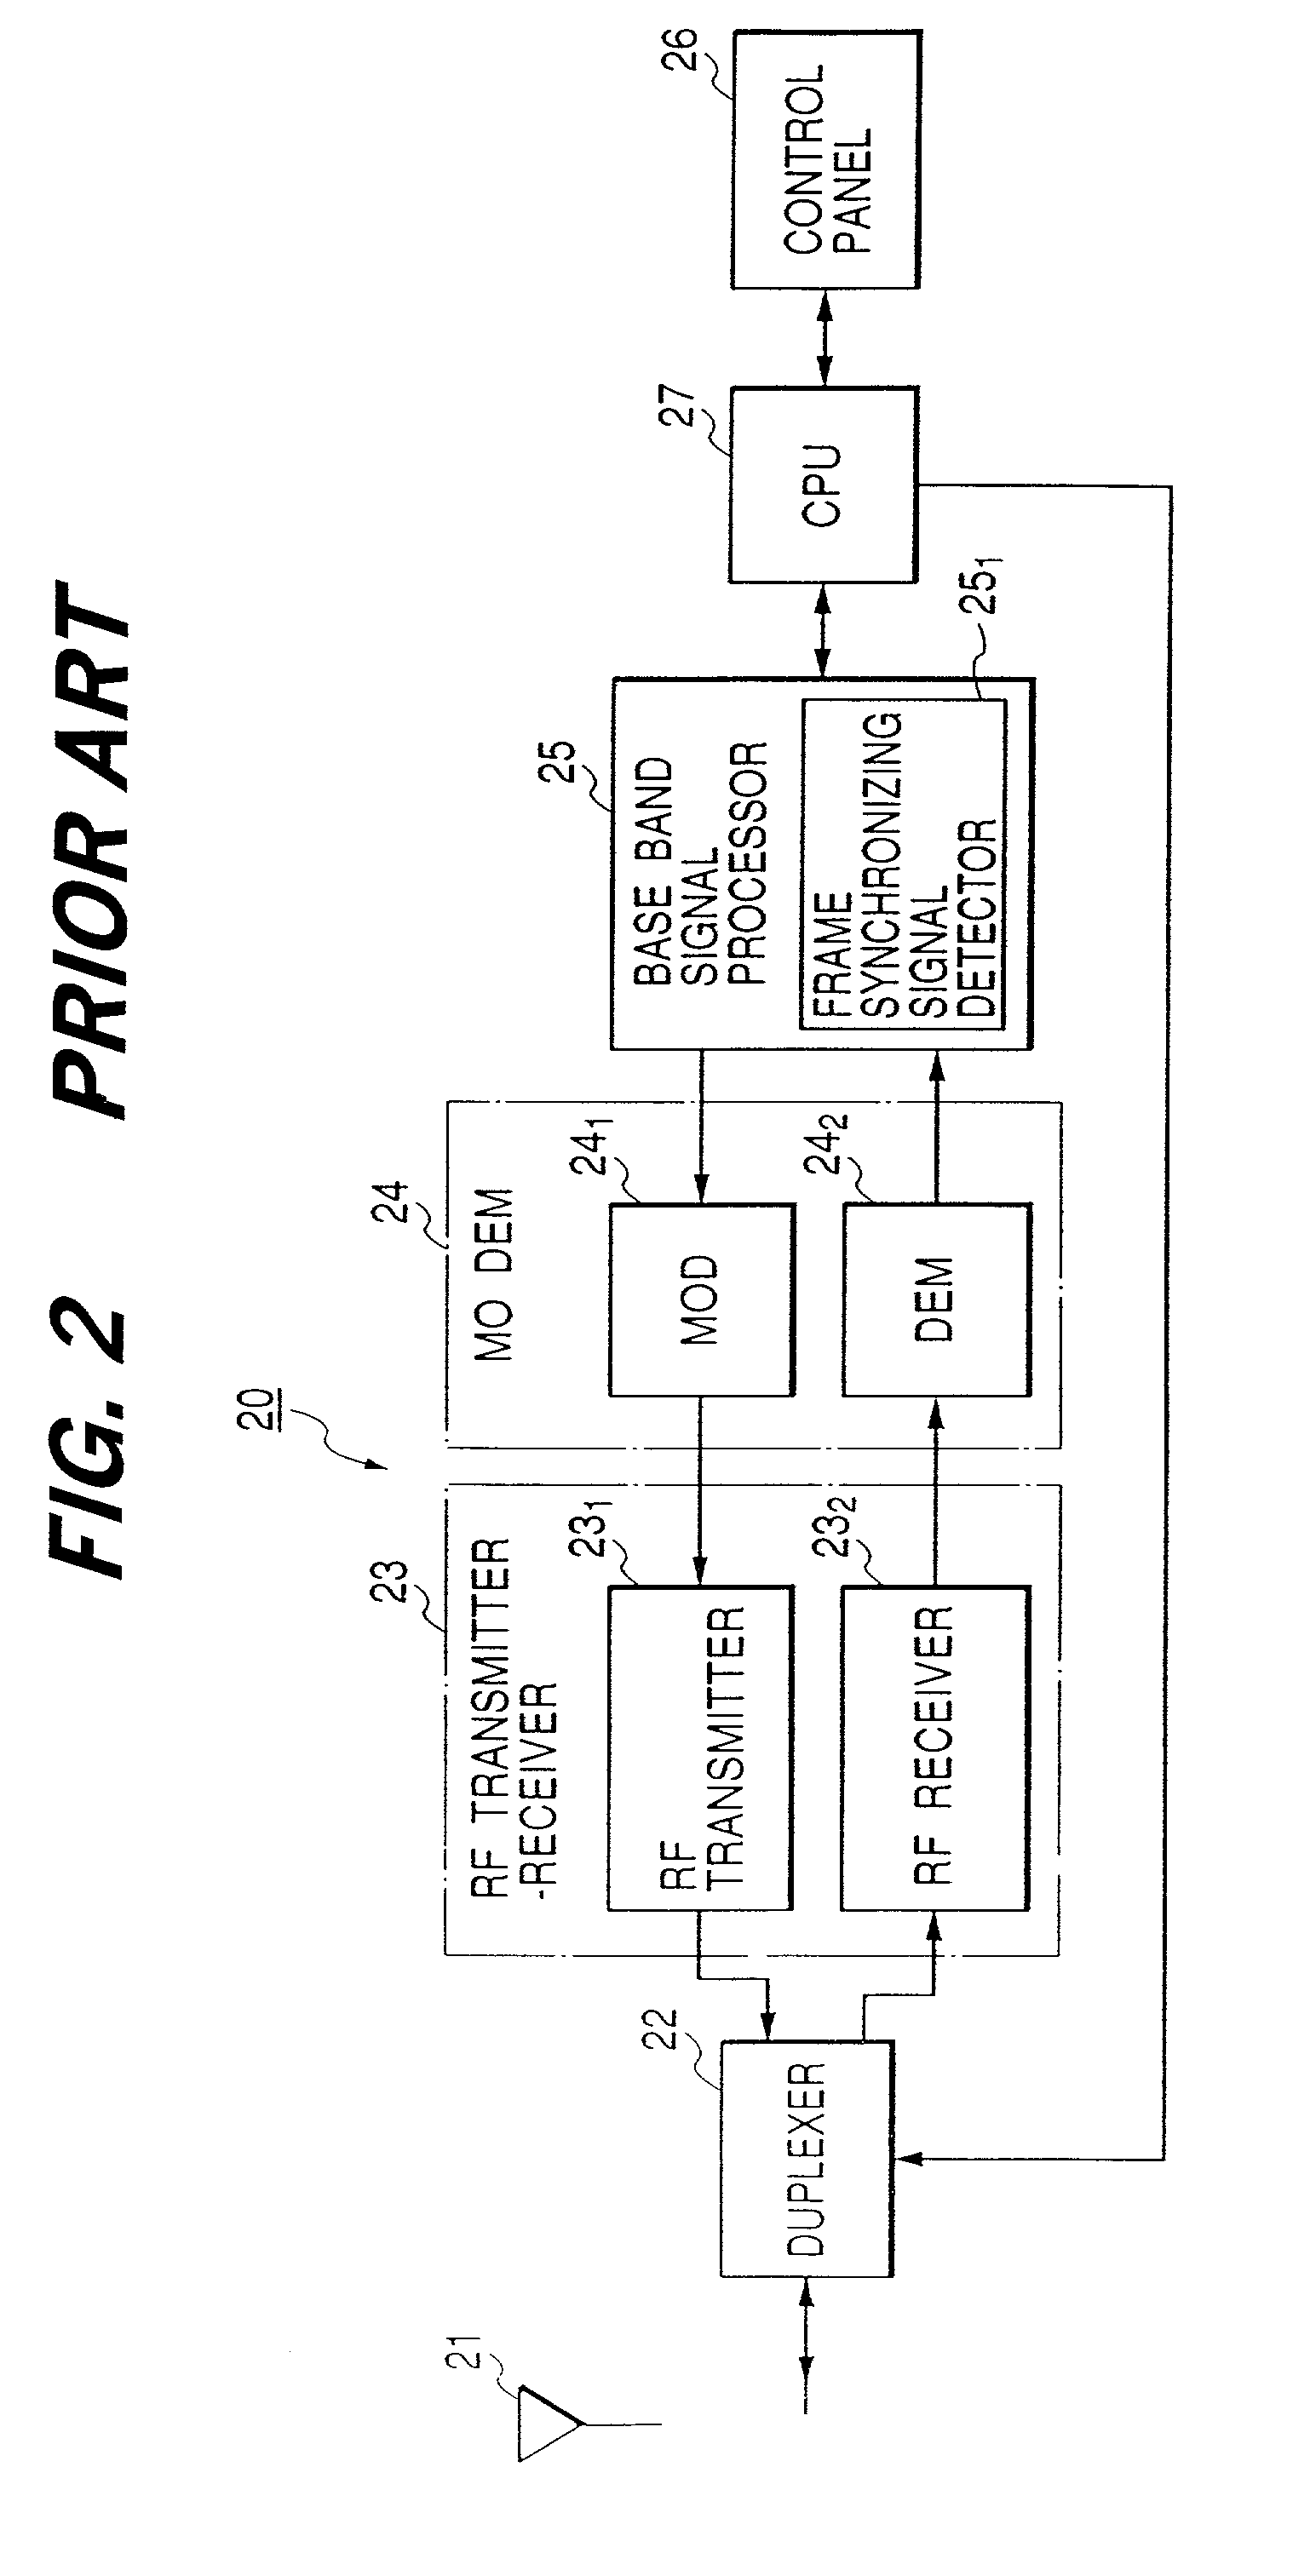 Frame synchronizing signal detecting method for reducing occurrence of error synchronization before link of frame synchronizing signal is established